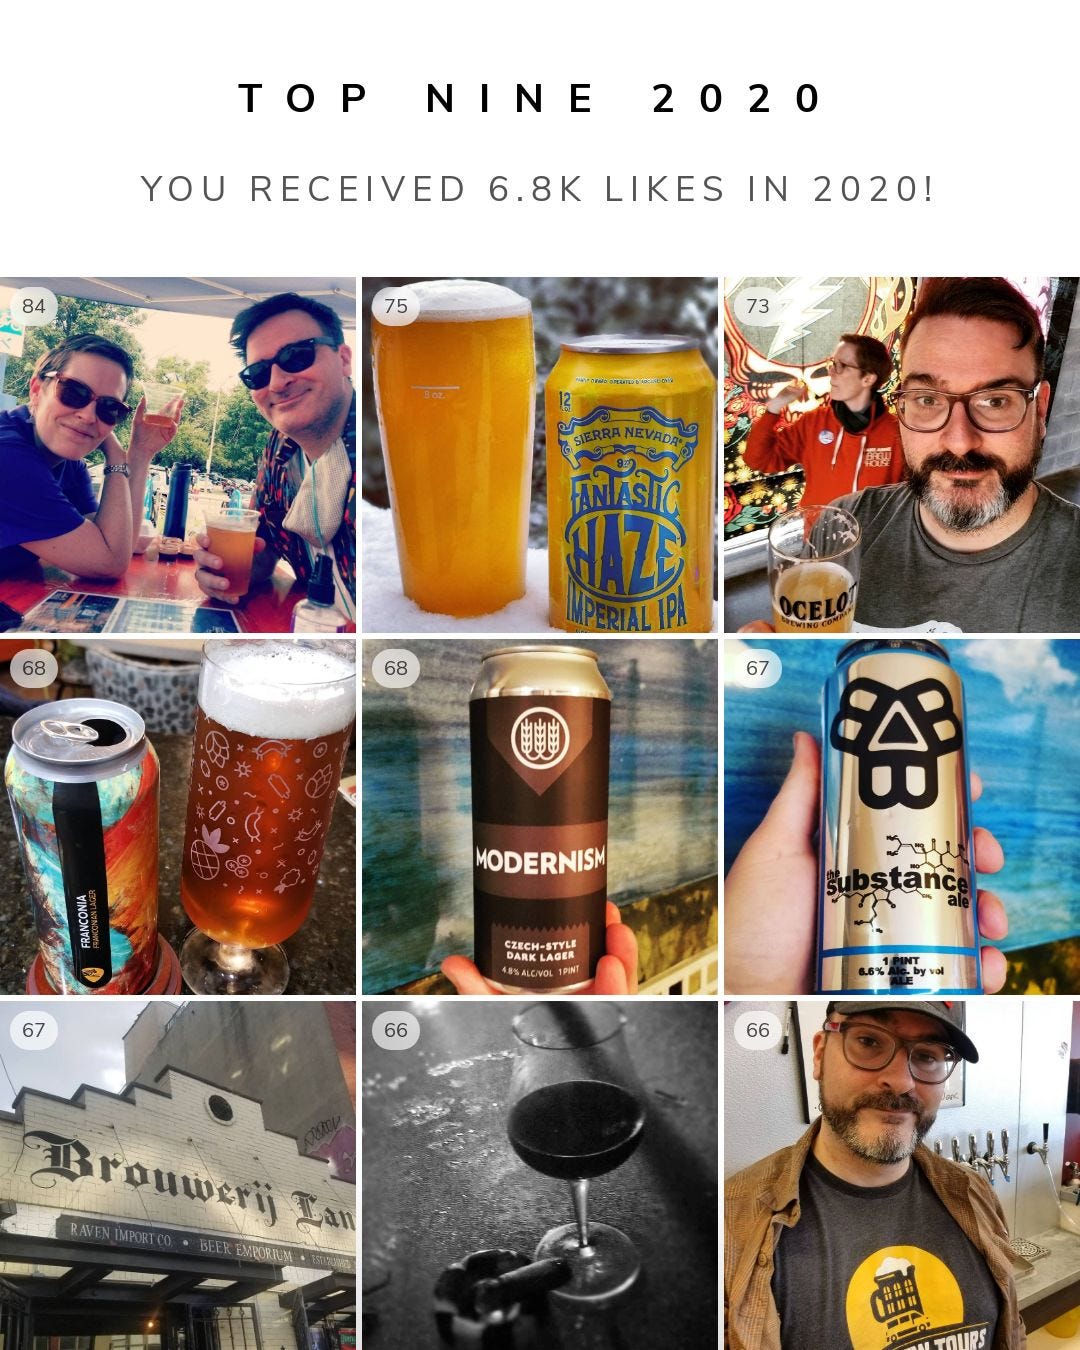 A grid of nine photos showing the top nine posts from my Instagram. Frankly most are just beer. More details in photos below.